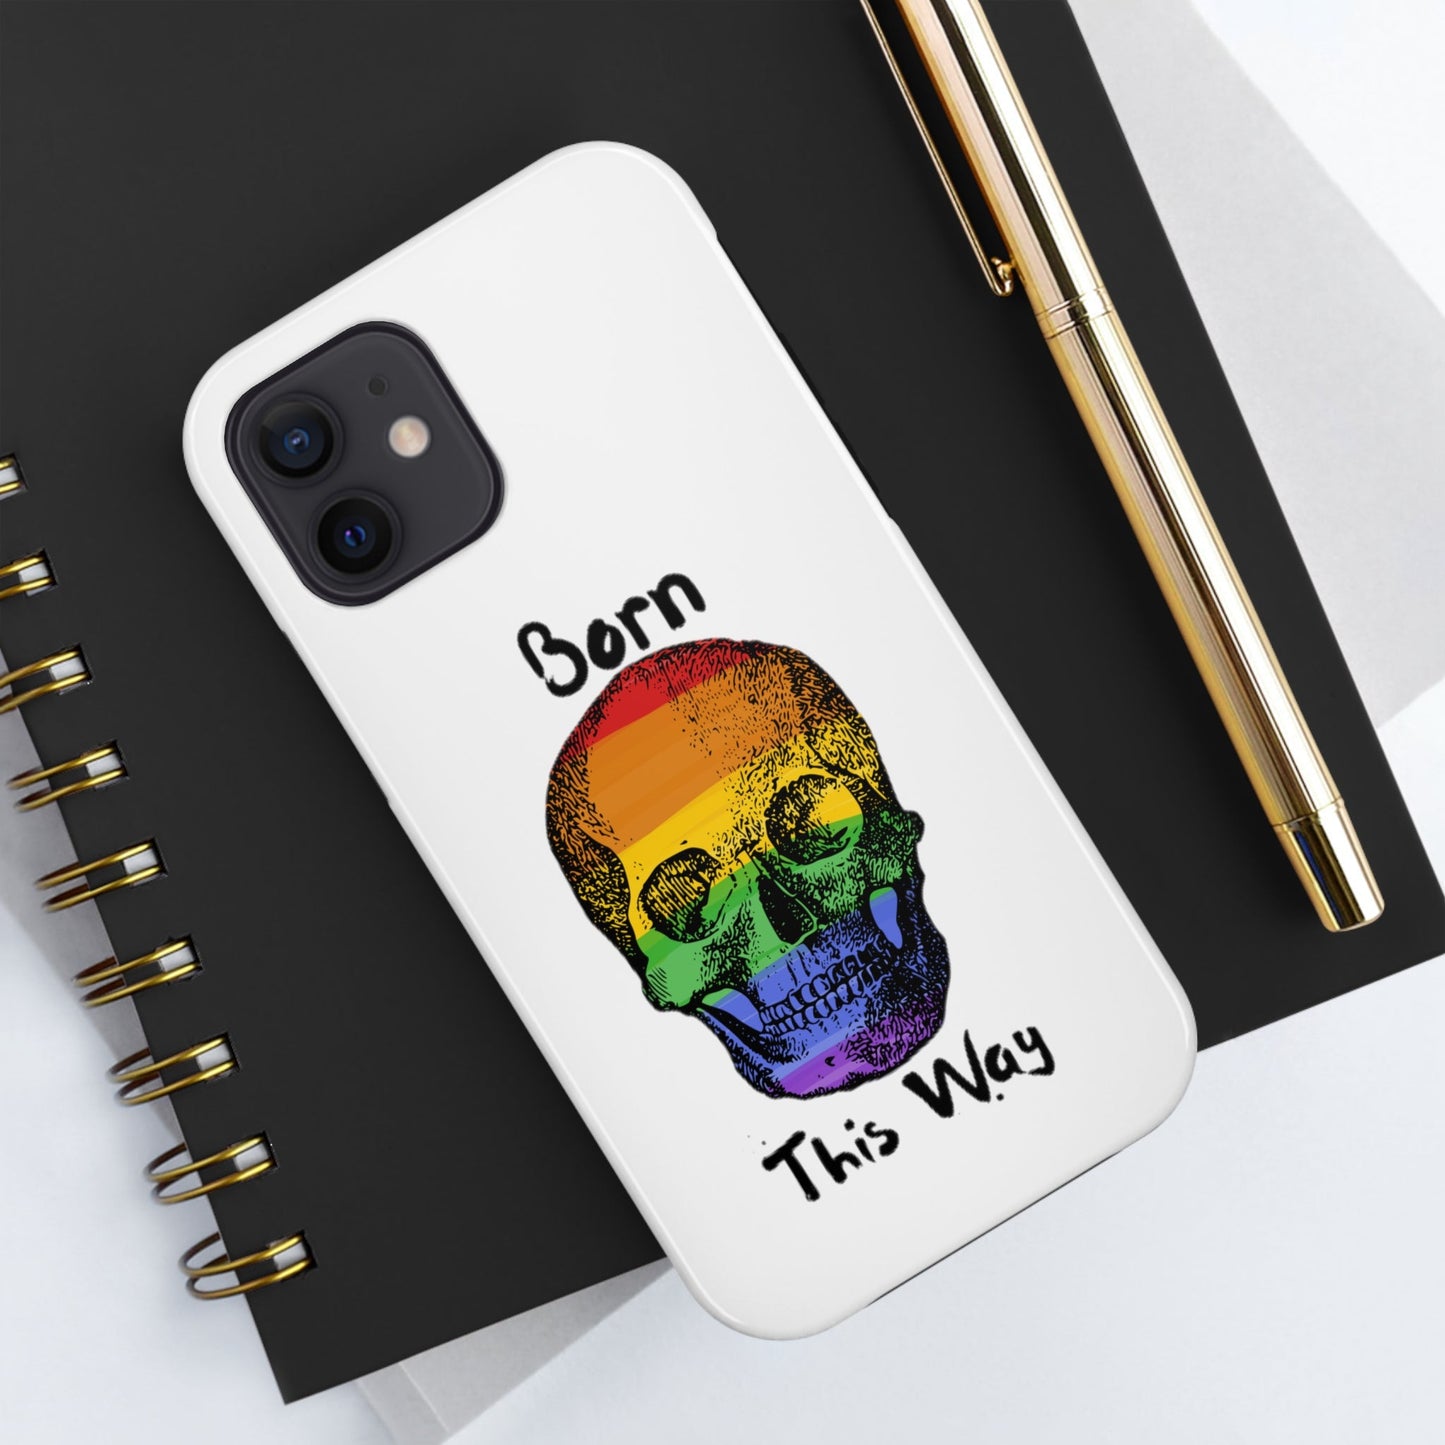 Born This Way Skeleton Pride Tough Phone Cases for iPhone 7, 8, X, 11, 12, 13, 14 and morePhone CaseVTZdesignsiPhone 12AccessoriesGlossyiPhone Cases